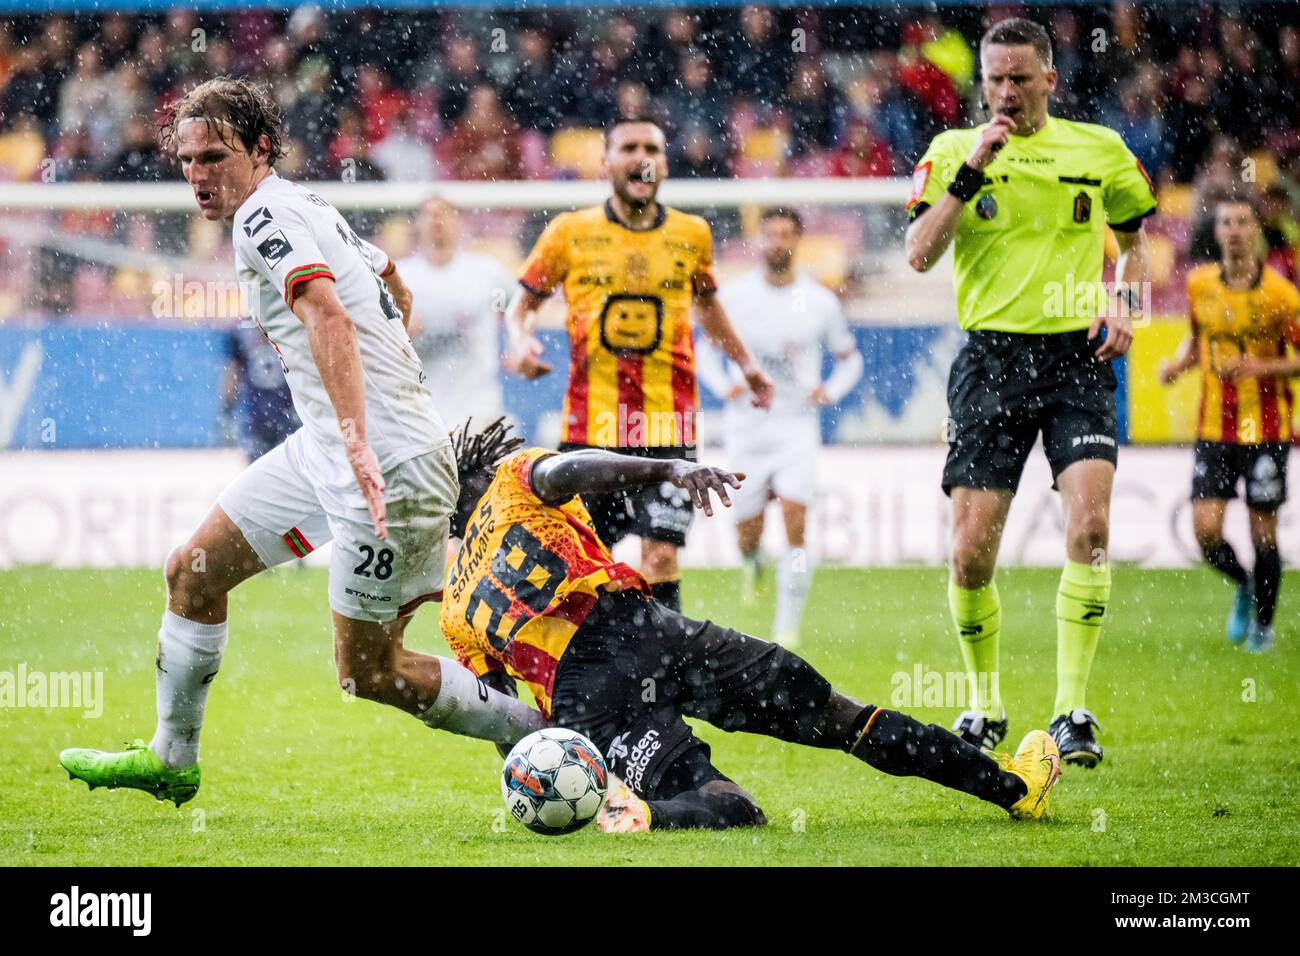 OHL's Ewoud Pletinckx and Mechelen's Frederic Soelle Soelle fight for the ball during a soccer match between KV Mechelen and OH Leuven, Saturday 17 September 2022 in Mechelen, on day 9 of the 2022-2023 'Jupiler Pro League' first division of the Belgian championship. BELGA PHOTO JASPER JACOBS Stock Photo